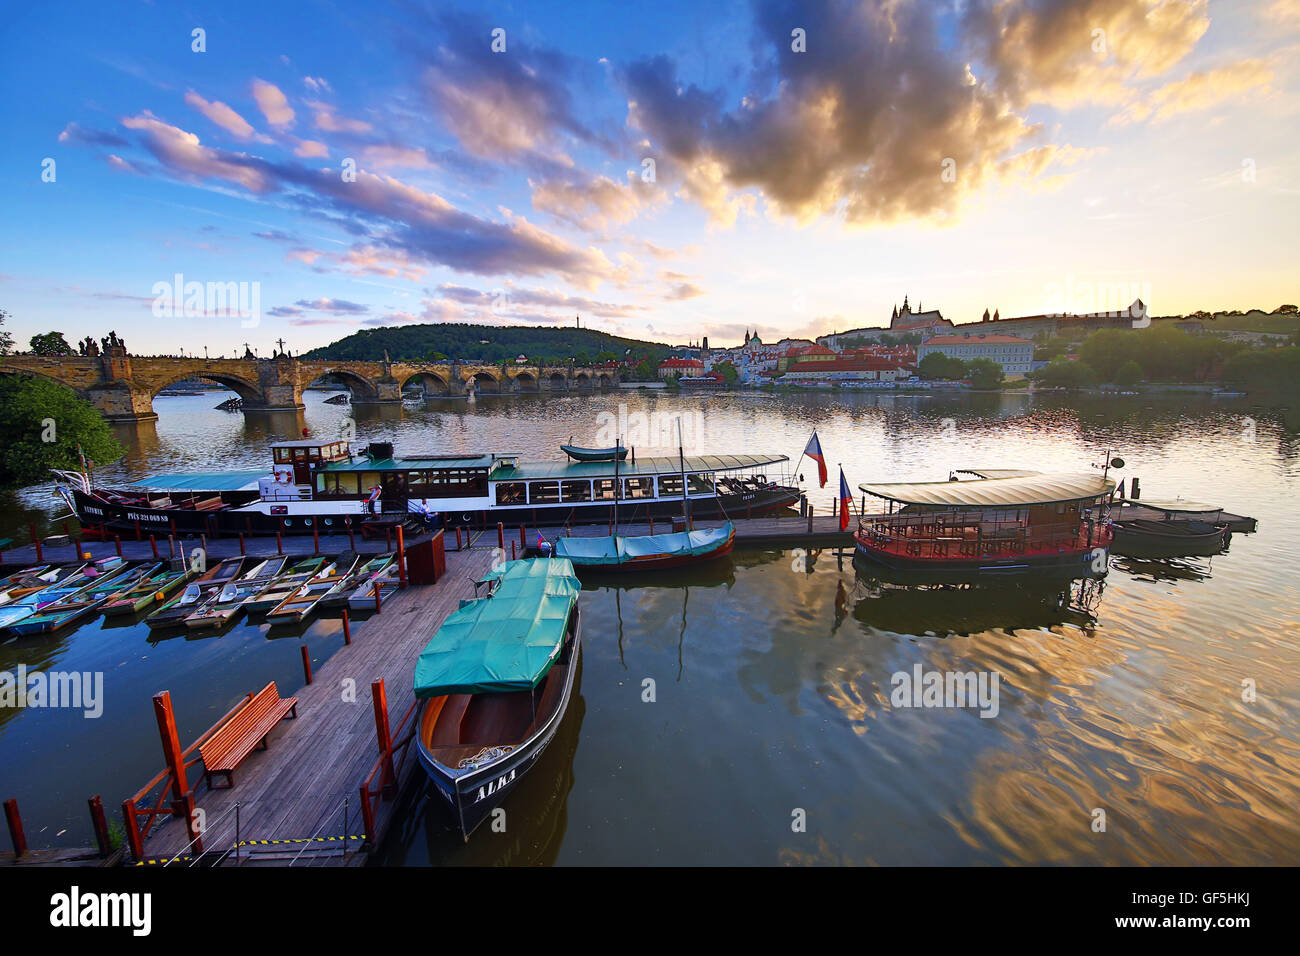 Charles Bridge over the Vltava River, Prague Castle, St Vitus Cathedral and boats at sunset in Prague, Czech Republic Stock Photo